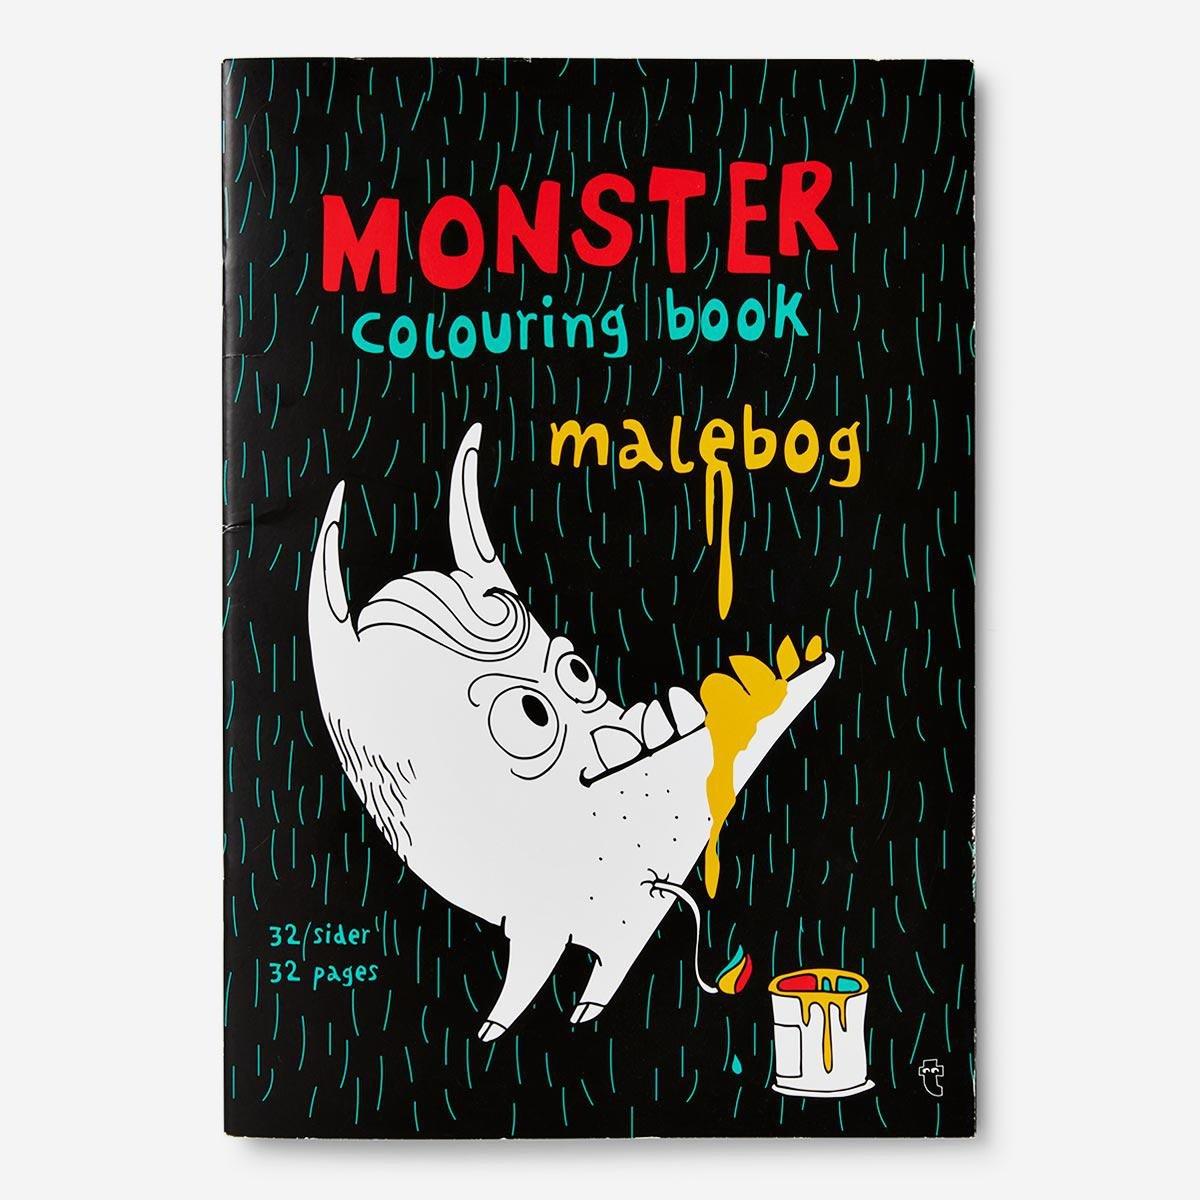 Monster colouring book